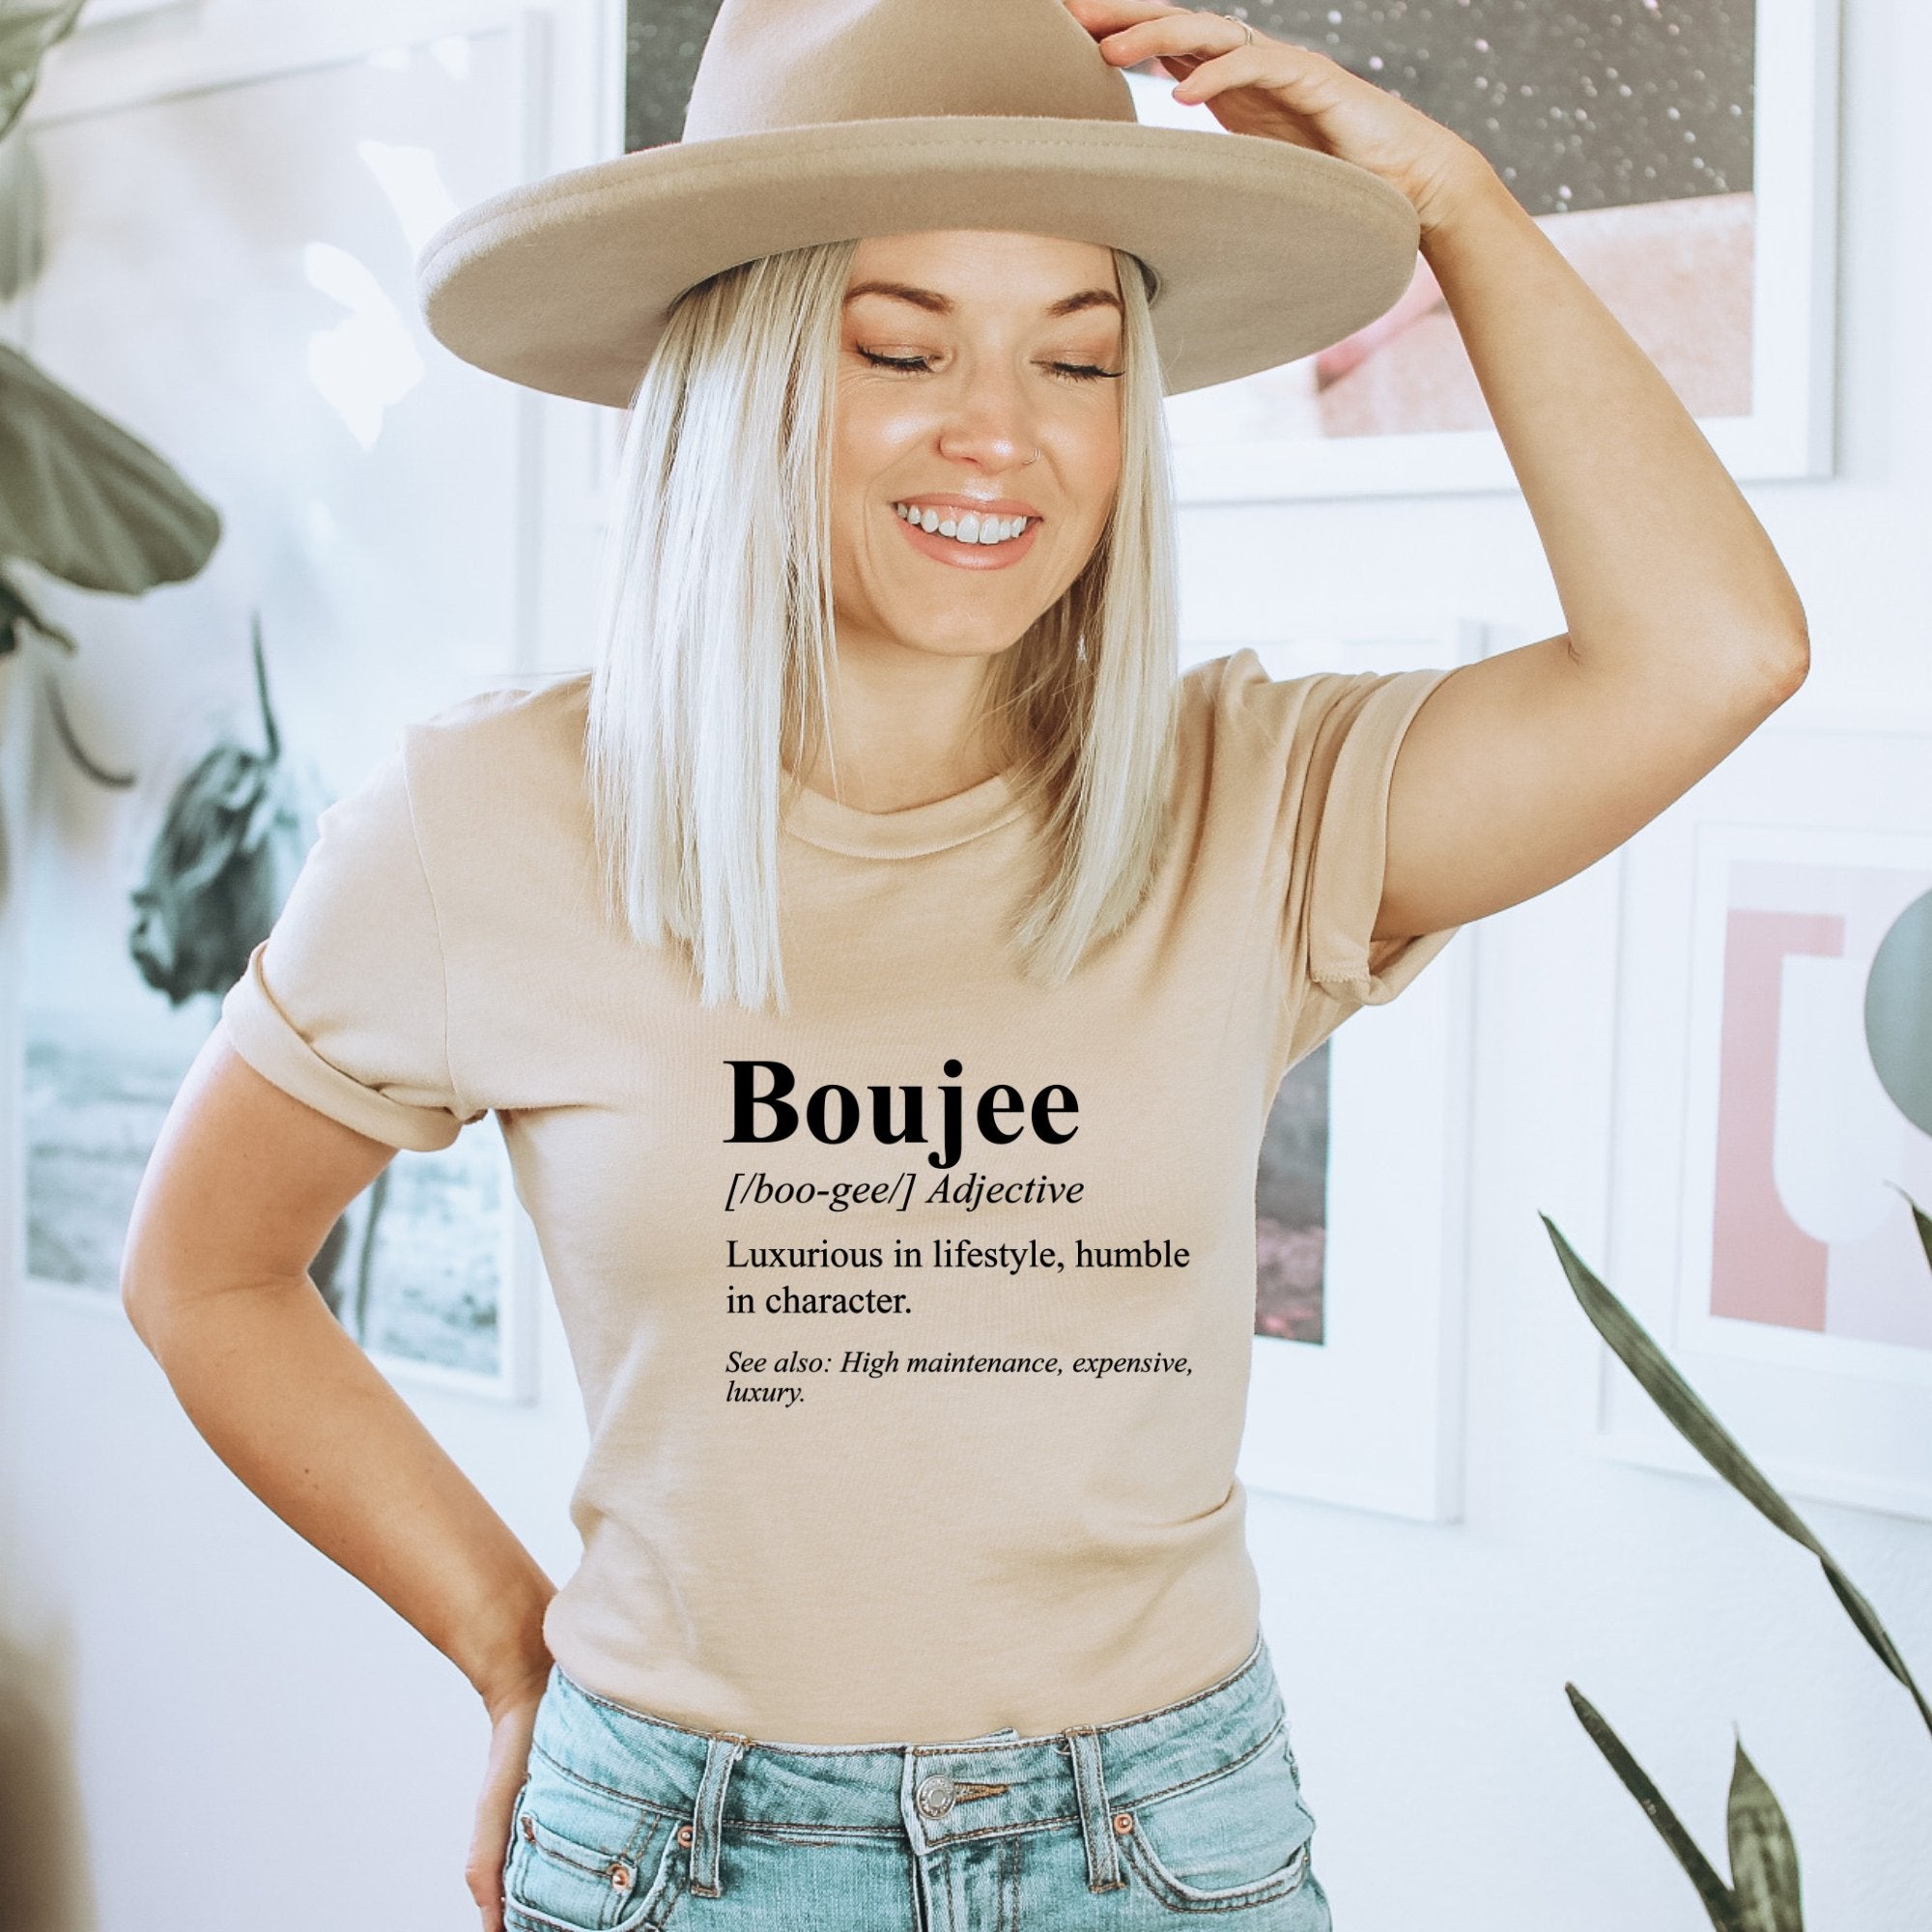 Boujee Defined T-Shirt - Trendznmore